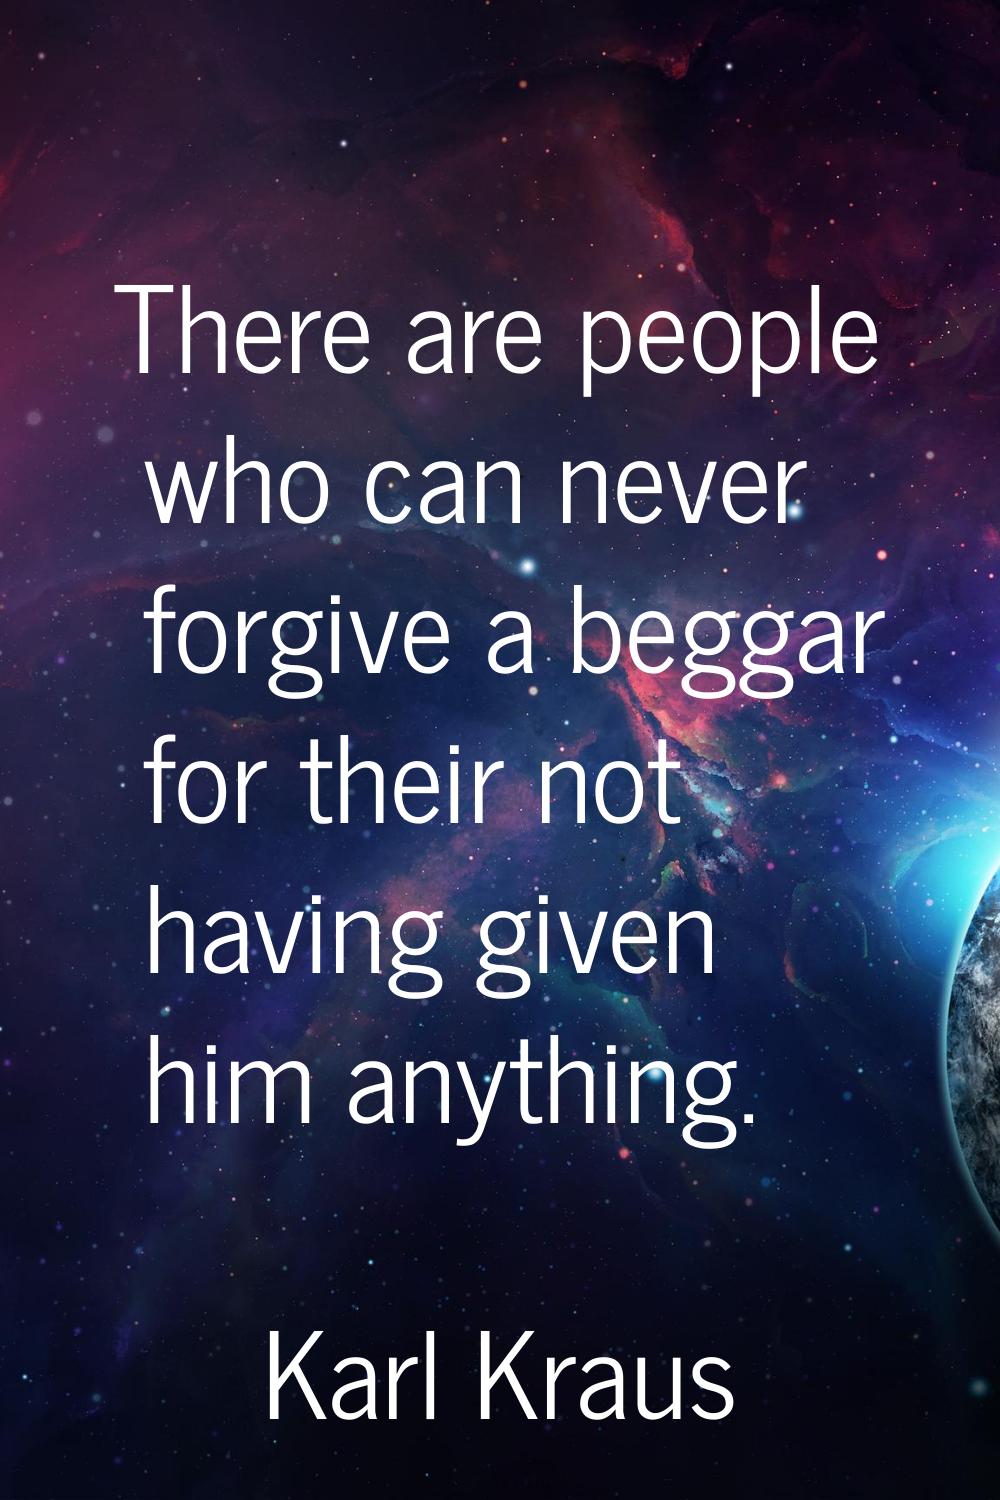 There are people who can never forgive a beggar for their not having given him anything.